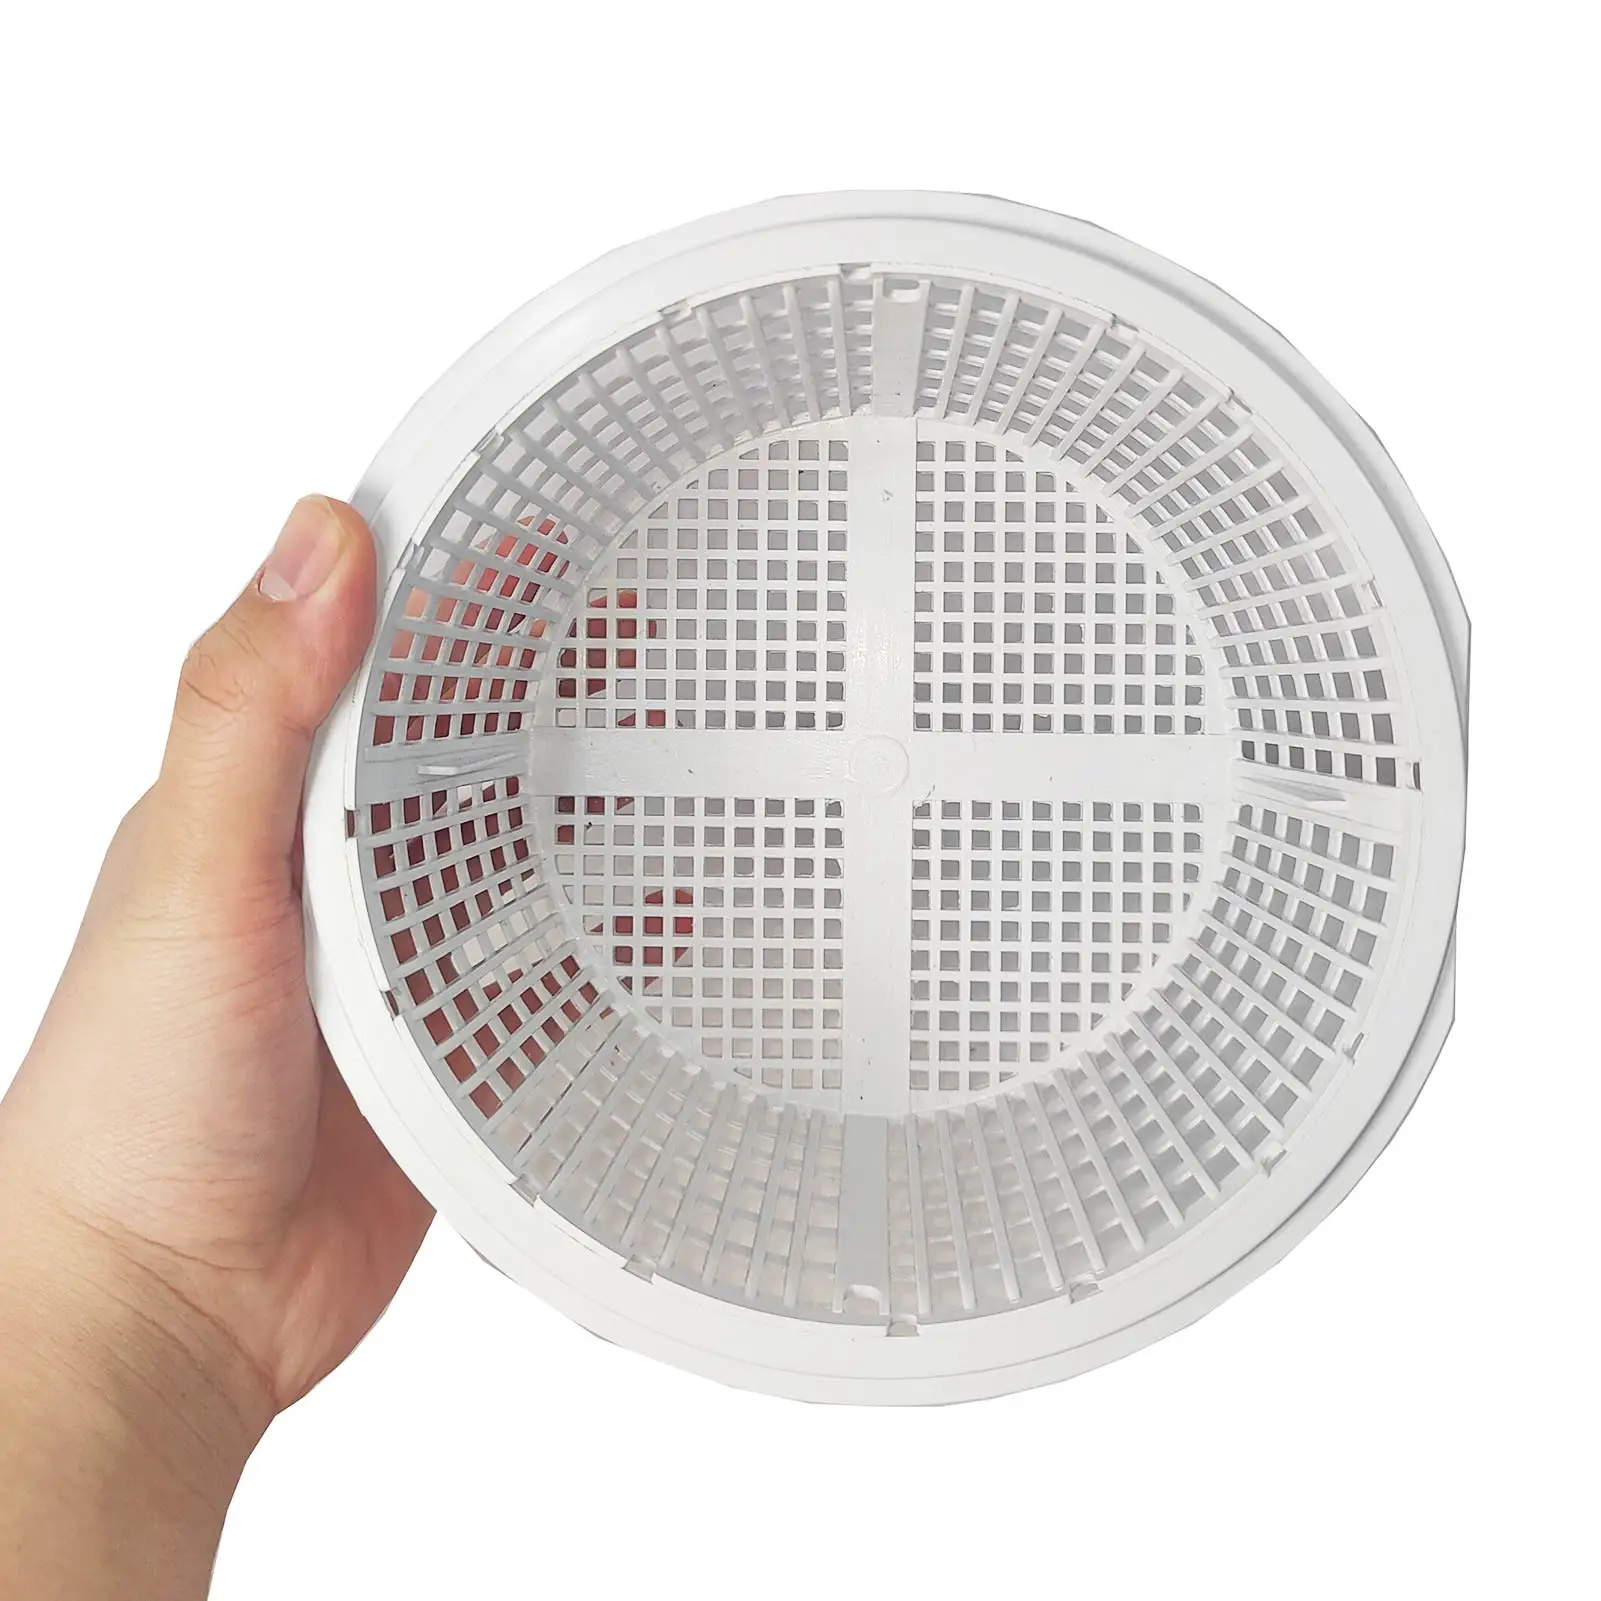 

Durable Pool Filter Basket Replacement Pool Skimmer Baskets Round Strainer Basket Skim Remove Leaves Bugs And Debris For Pools